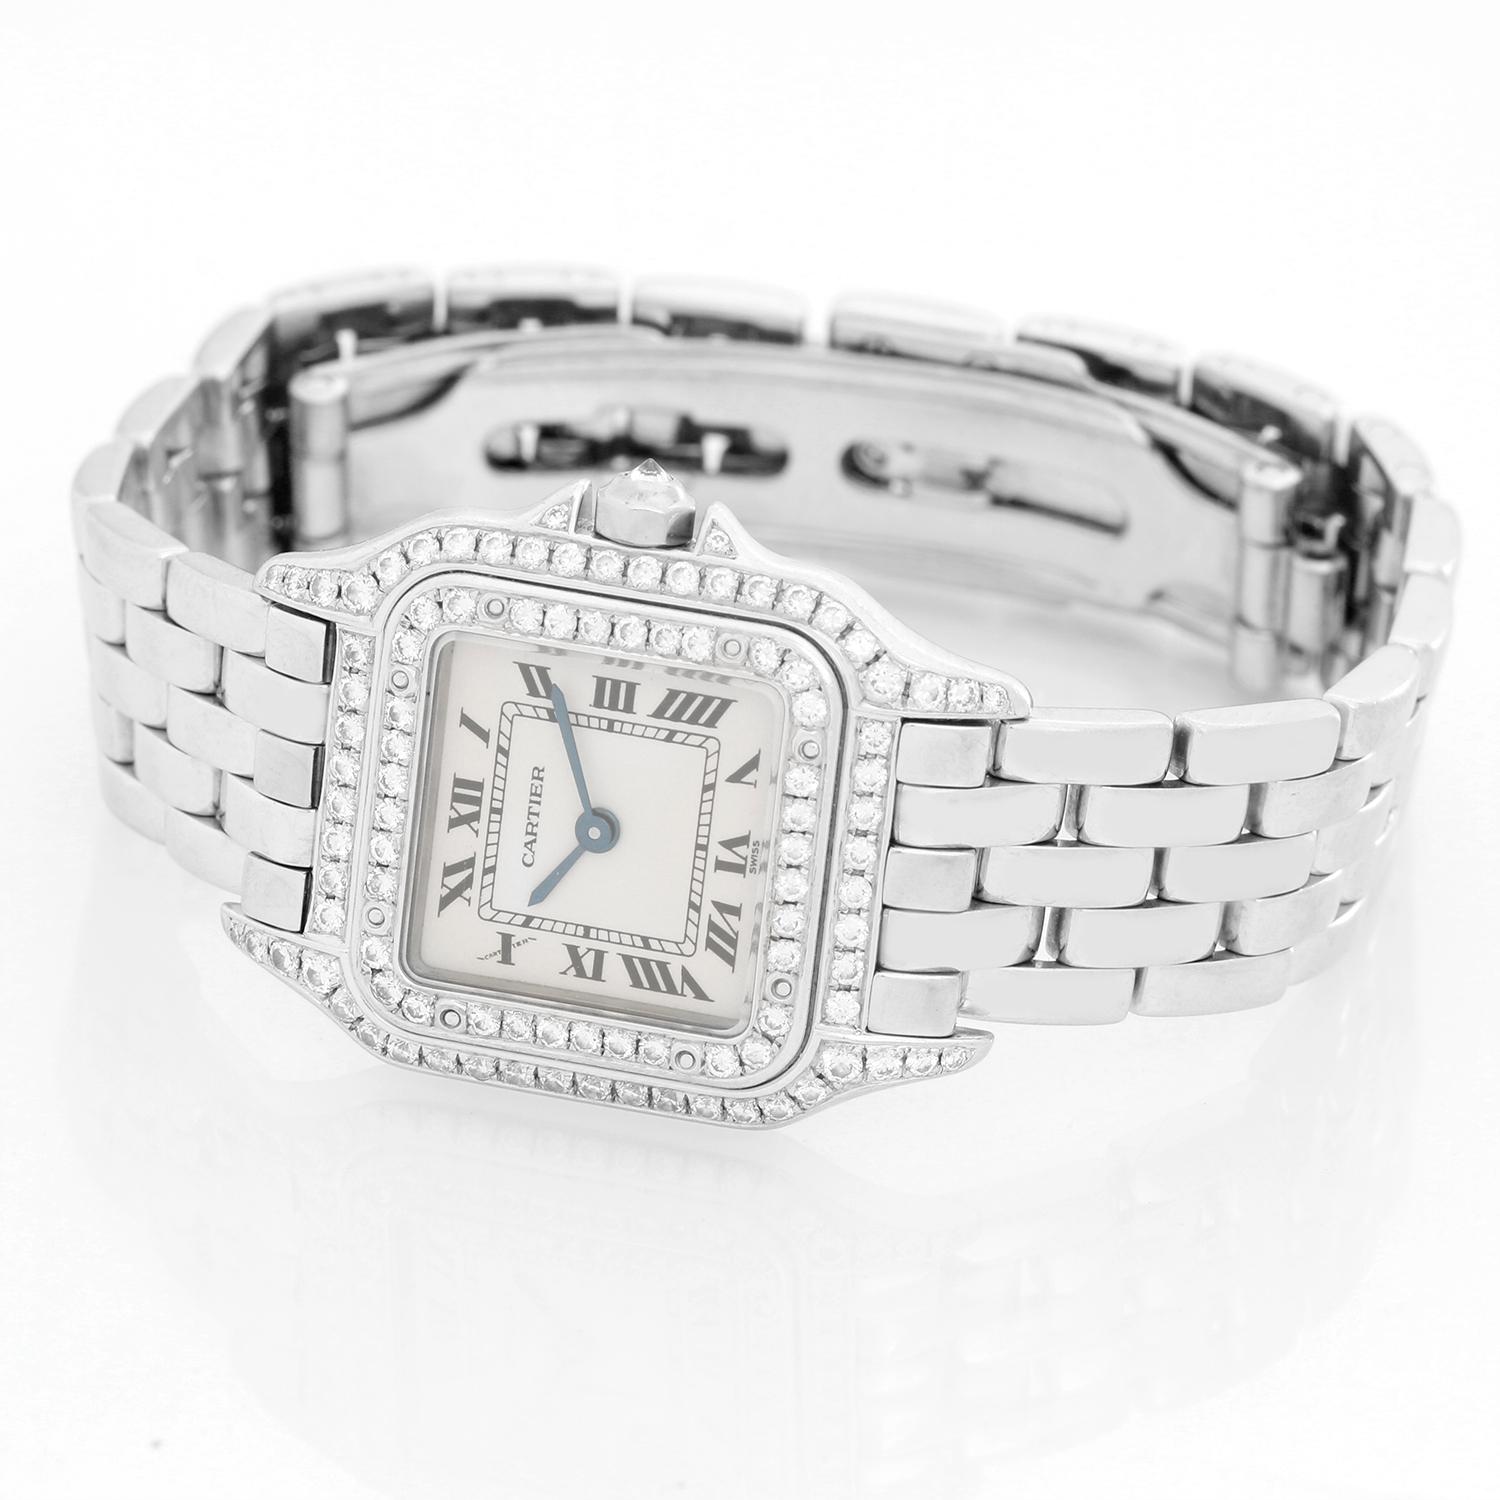 Cartier Panther 18K White Gold with Double Diamond Bezel -  Quartz. 18K White Gold case (  22 mm ). Ivory dial with blue steel hands; Roman numerals. 18K White Gold bracelet. Pre-owned with Cartier box and books.